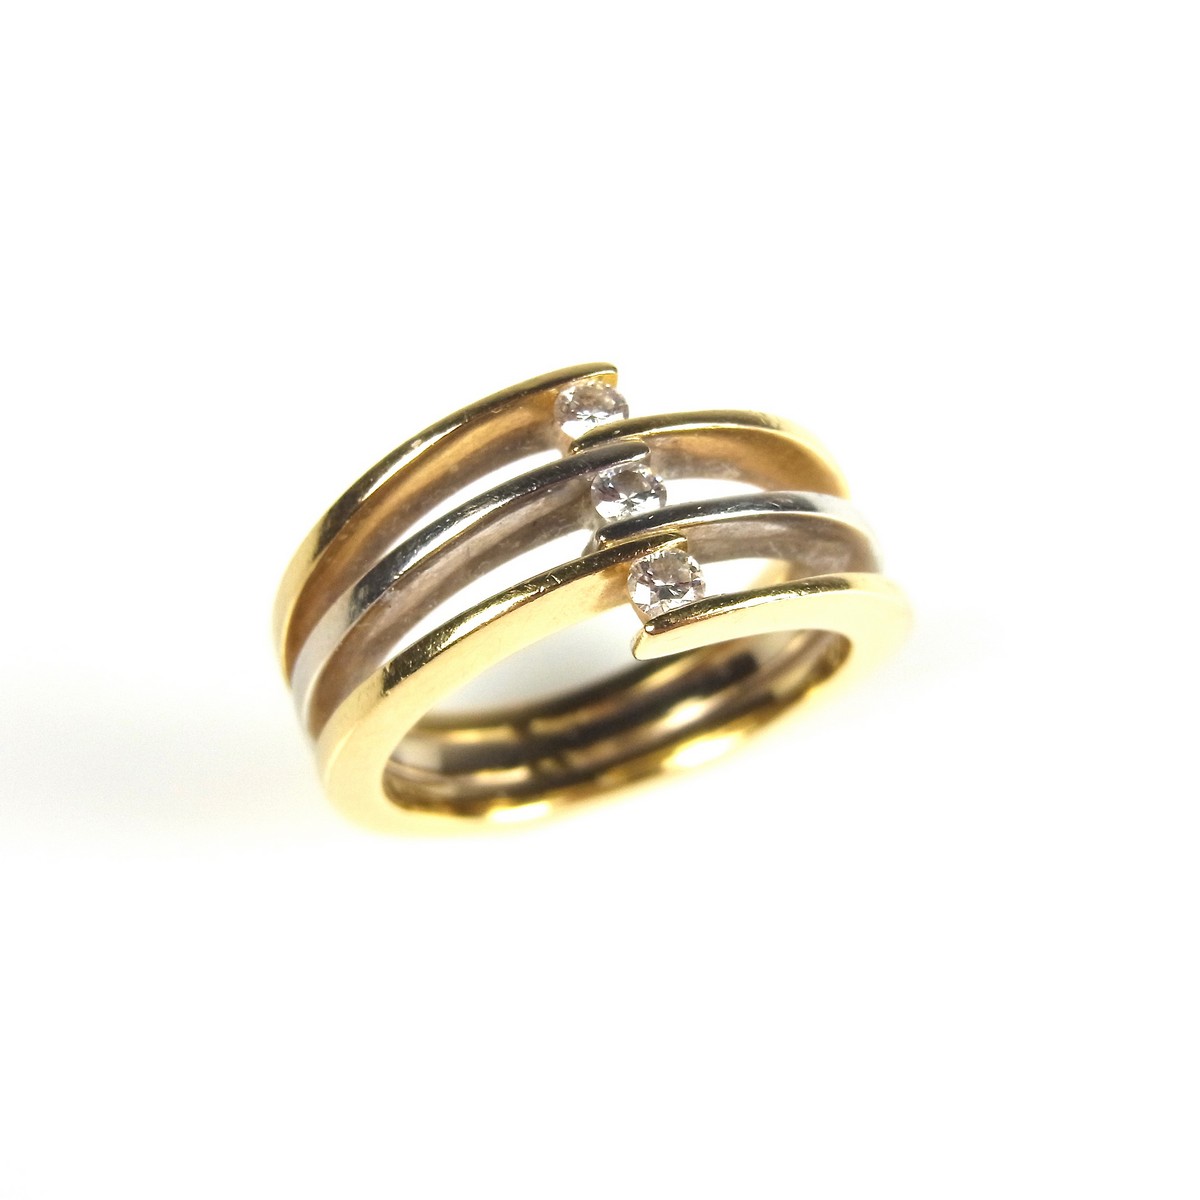 Yellow gold tri-band diamond crossover ring.